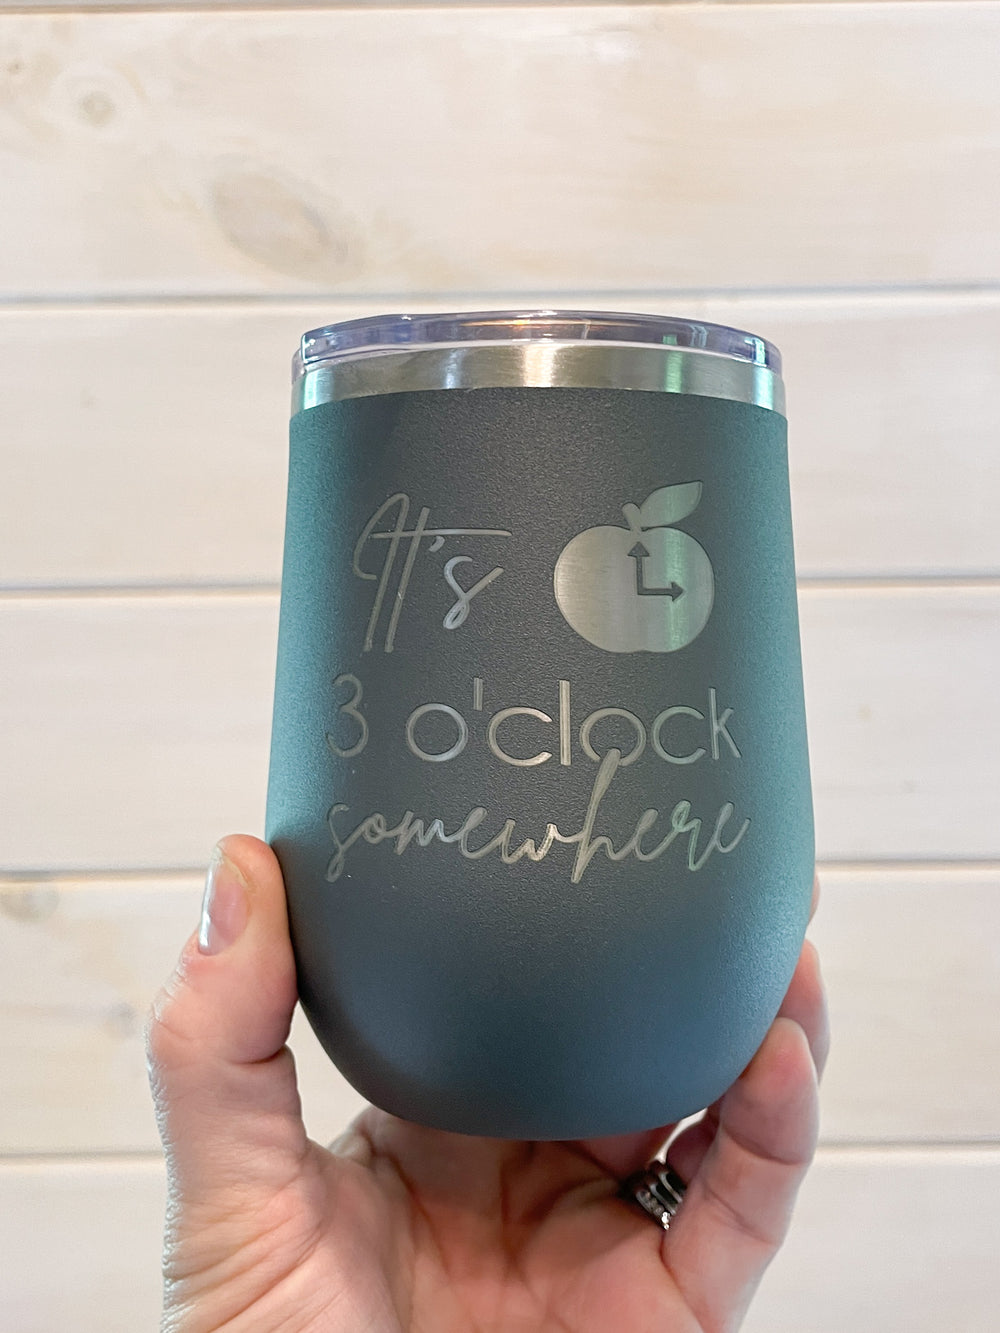 It's 3 o'click somewhere- Engraved Wine Tumbler for Teachers